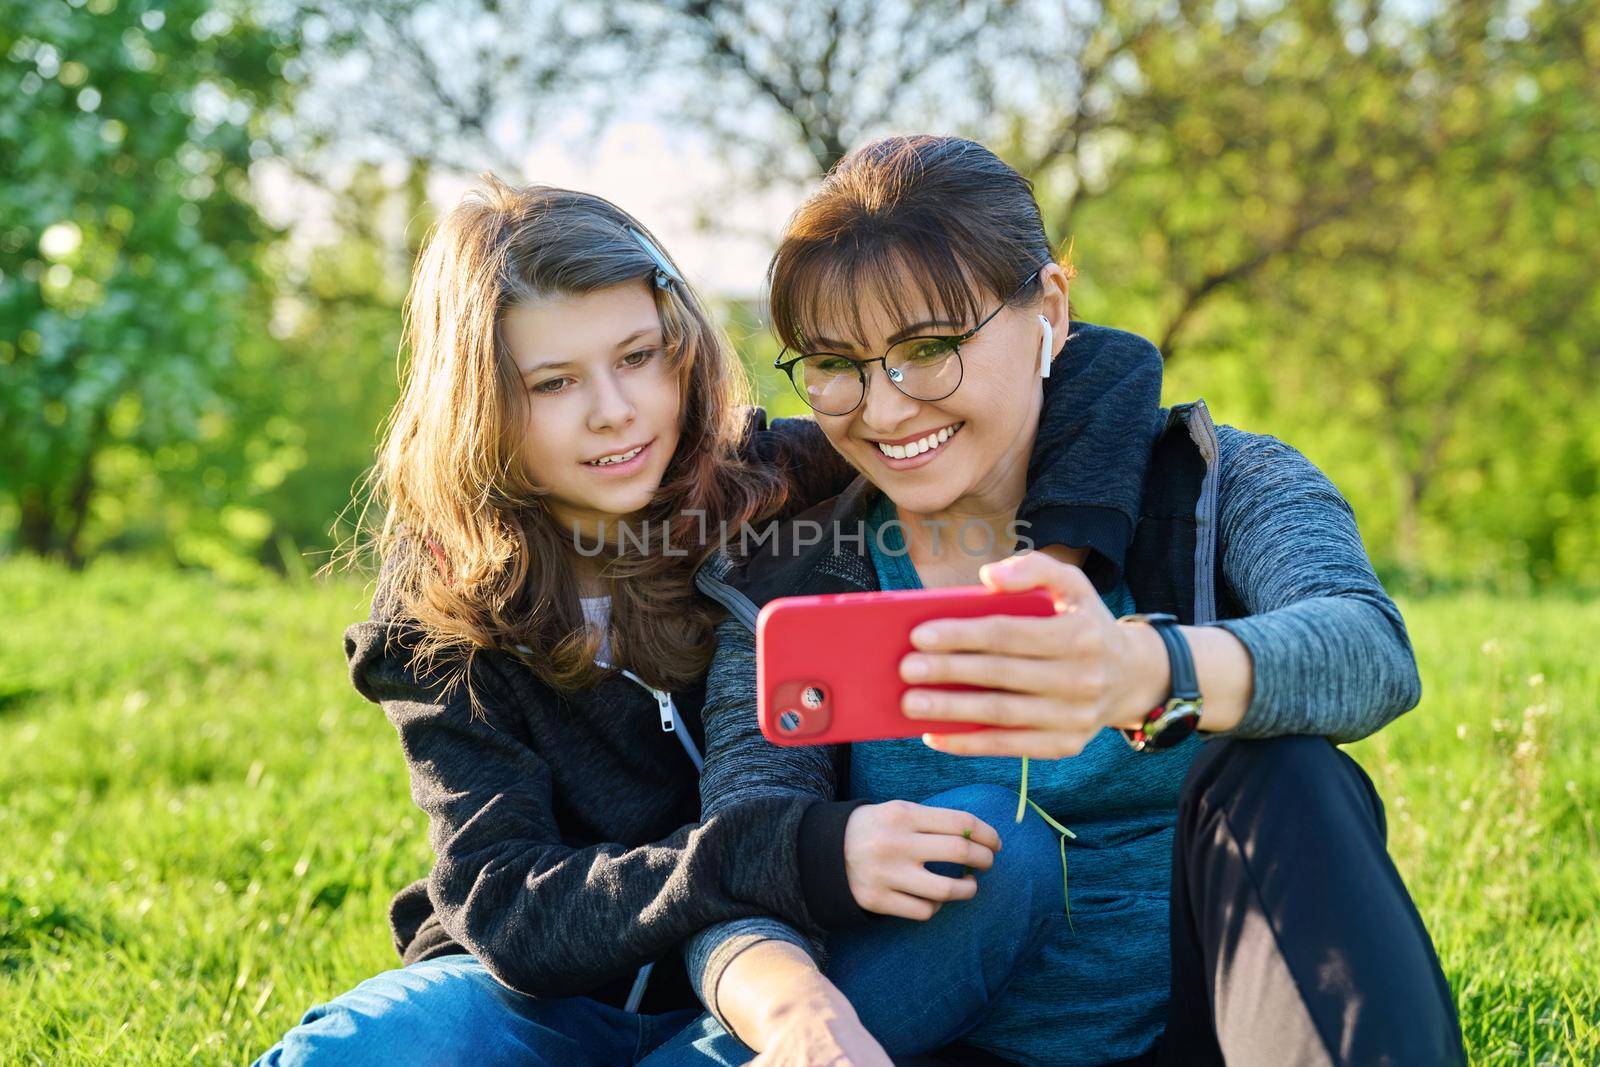 Mom and daughter 11, 12 years old having fun looking together at smartphone screen, outdoor, sitting embracing on grass. Family, leisure, lifestyle, relationship love, mother's day, motherhood concept